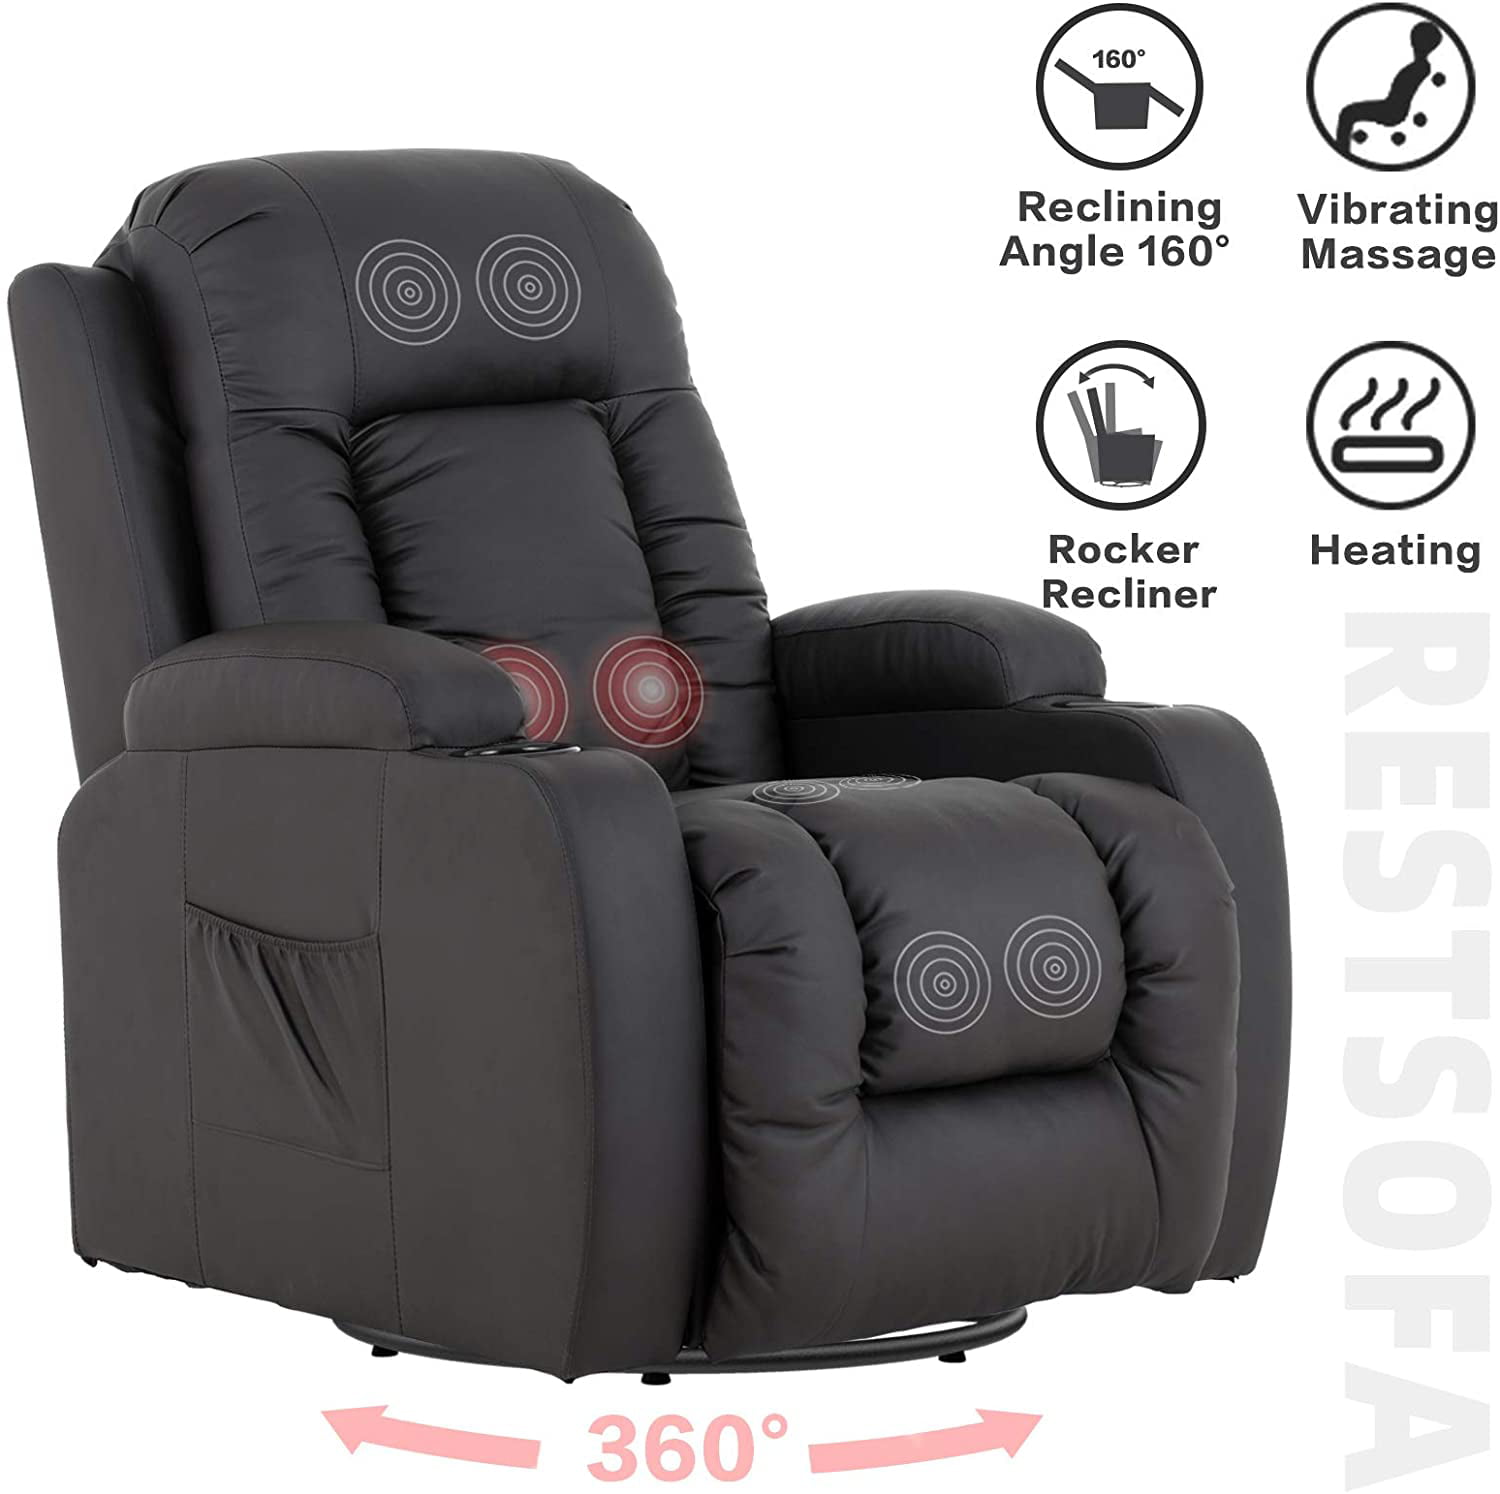 Mecor Massage Recliner Chair Pu Leather, Leather Rocker Recliner Swivel Chair